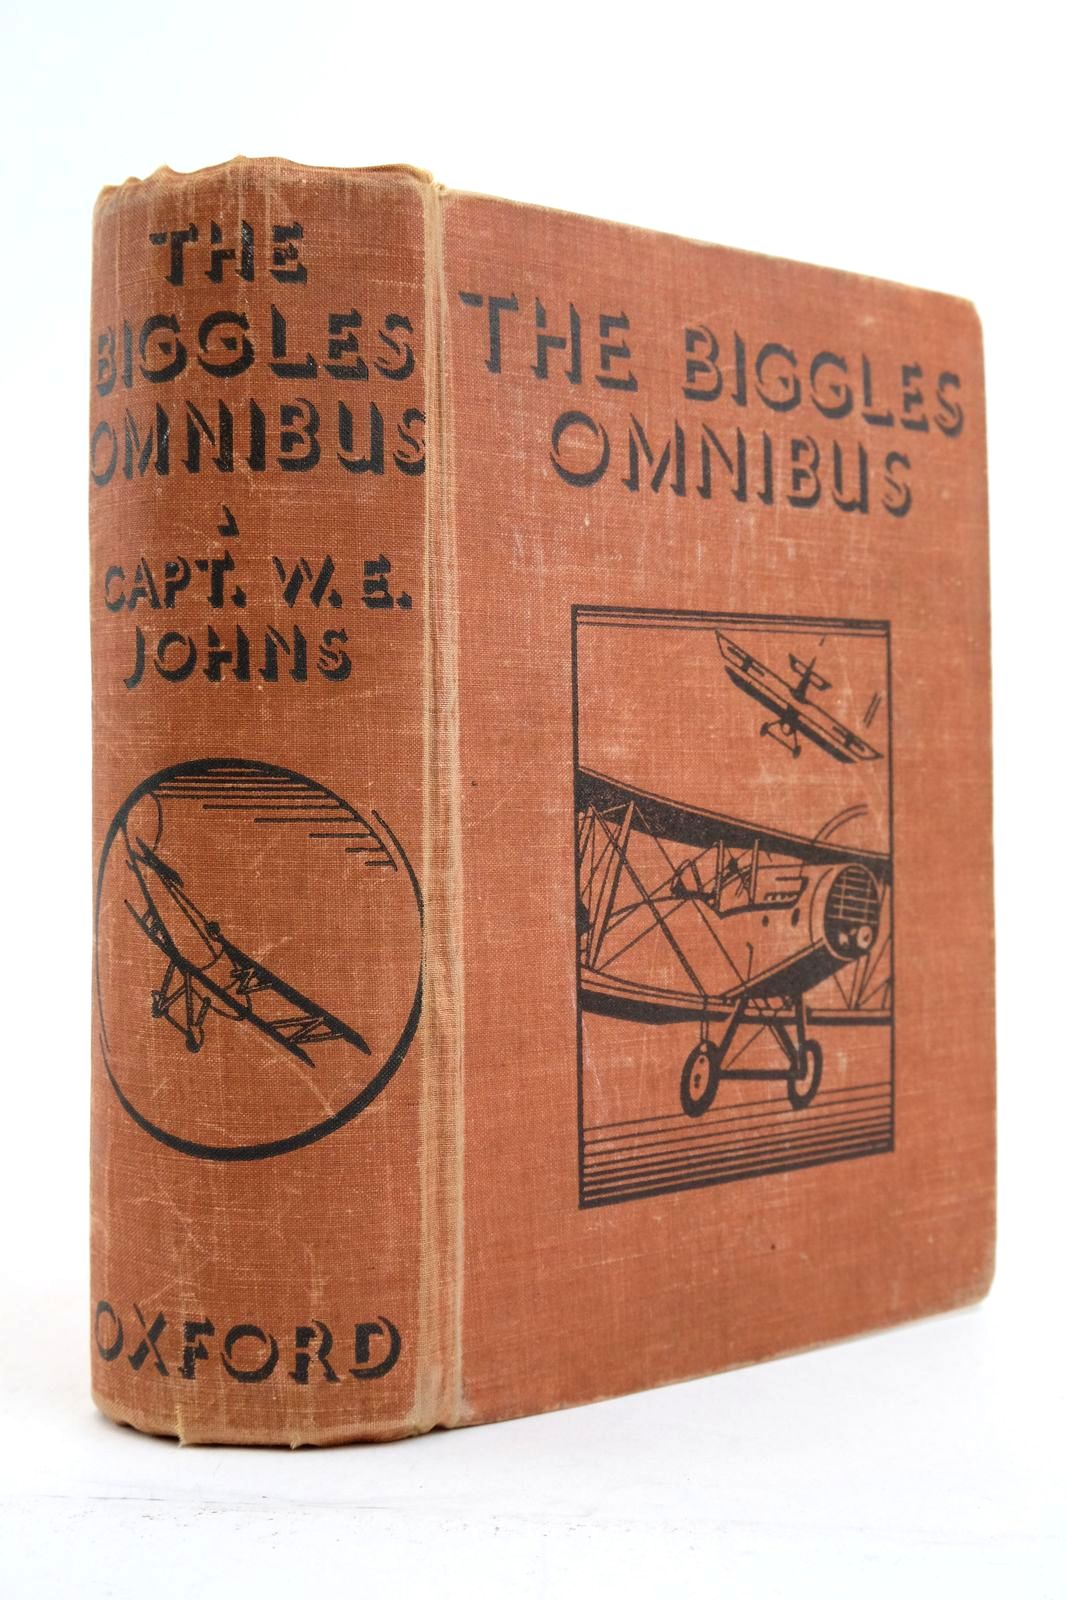 Photo of THE BIGGLES OMNIBUS written by Johns, W.E. published by Oxford University Press, Humphrey Milford (STOCK CODE: 2138990)  for sale by Stella & Rose's Books